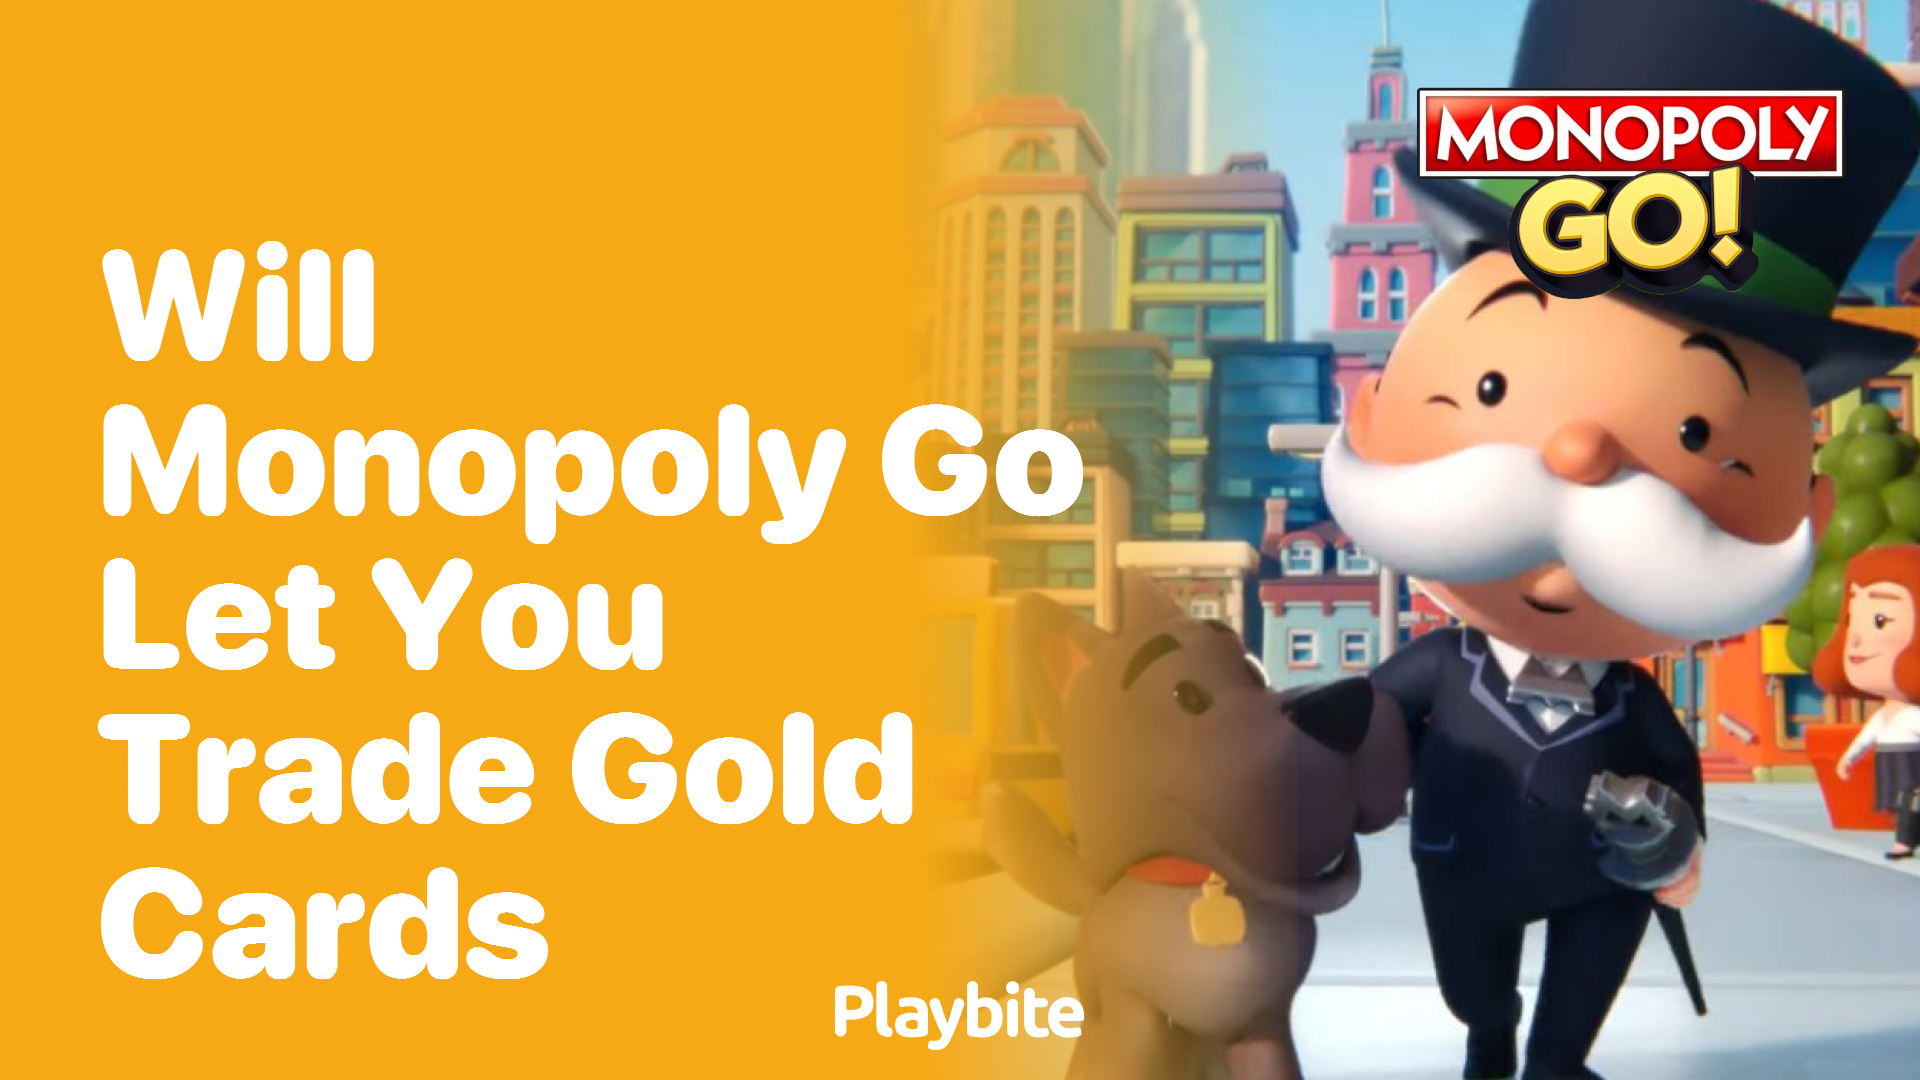 Will Monopoly Go Let You Trade Gold Cards?